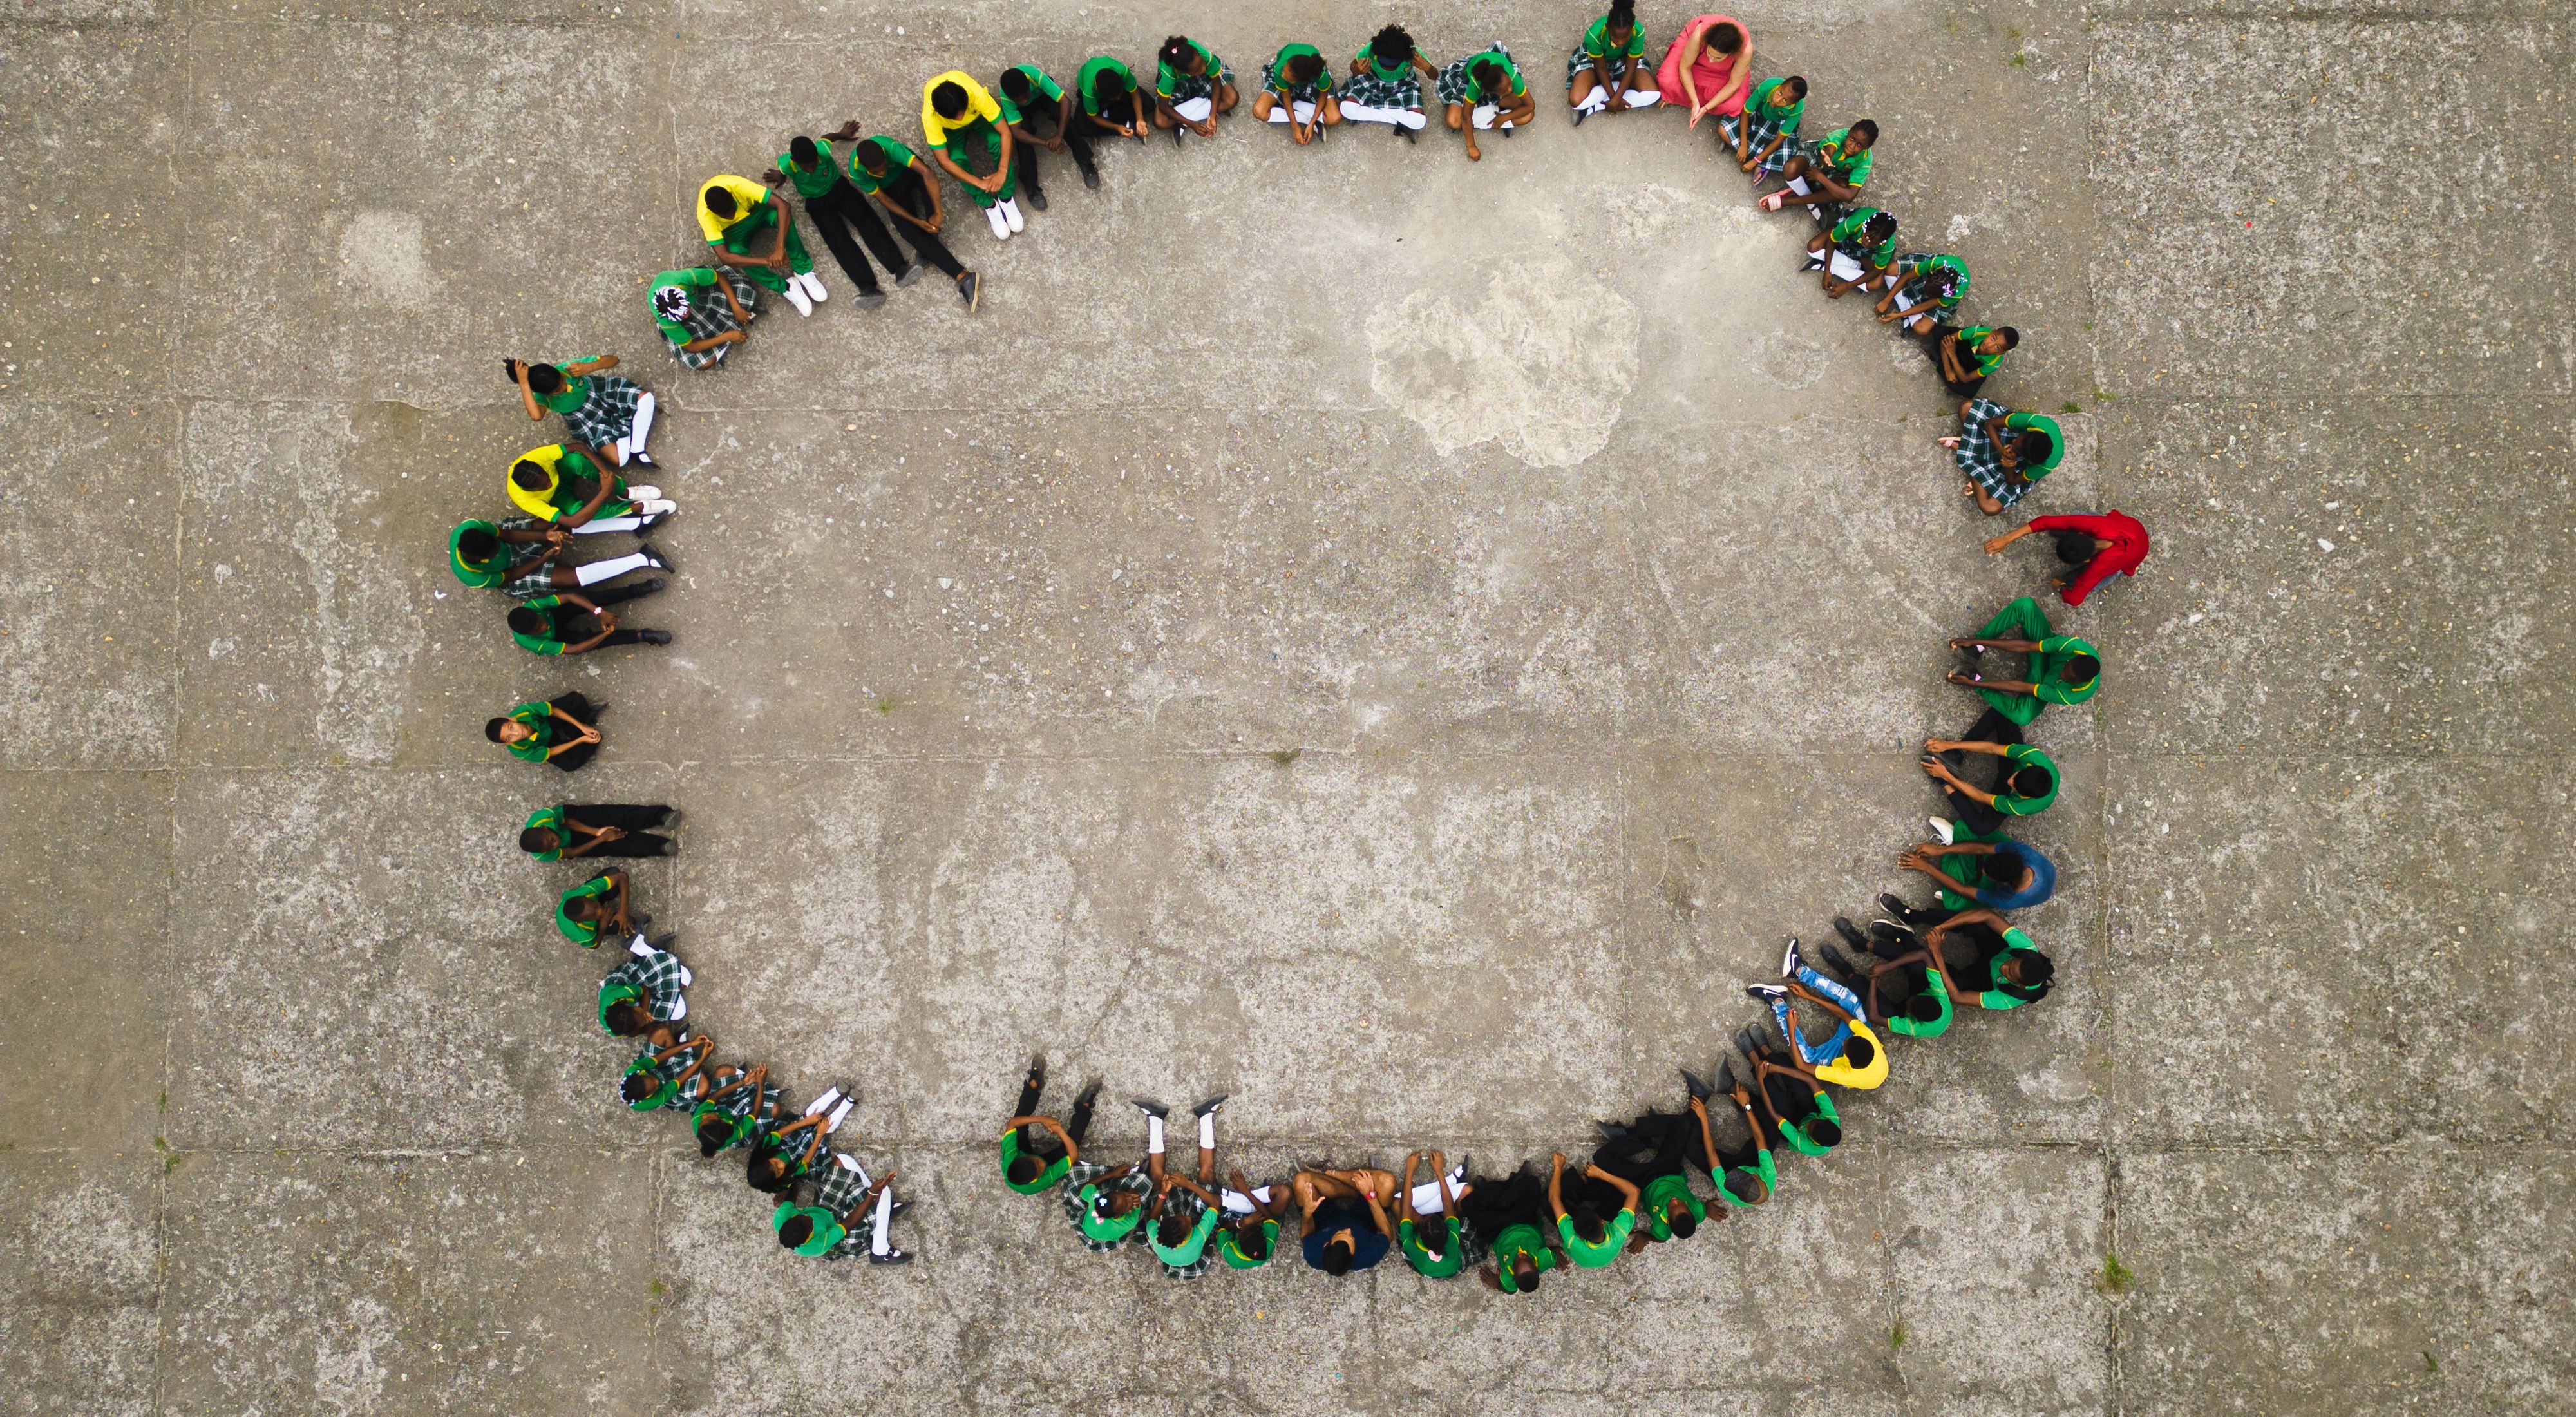 Aerial view looking down at a large group of teachers and students sitting in a large circle on the ground.